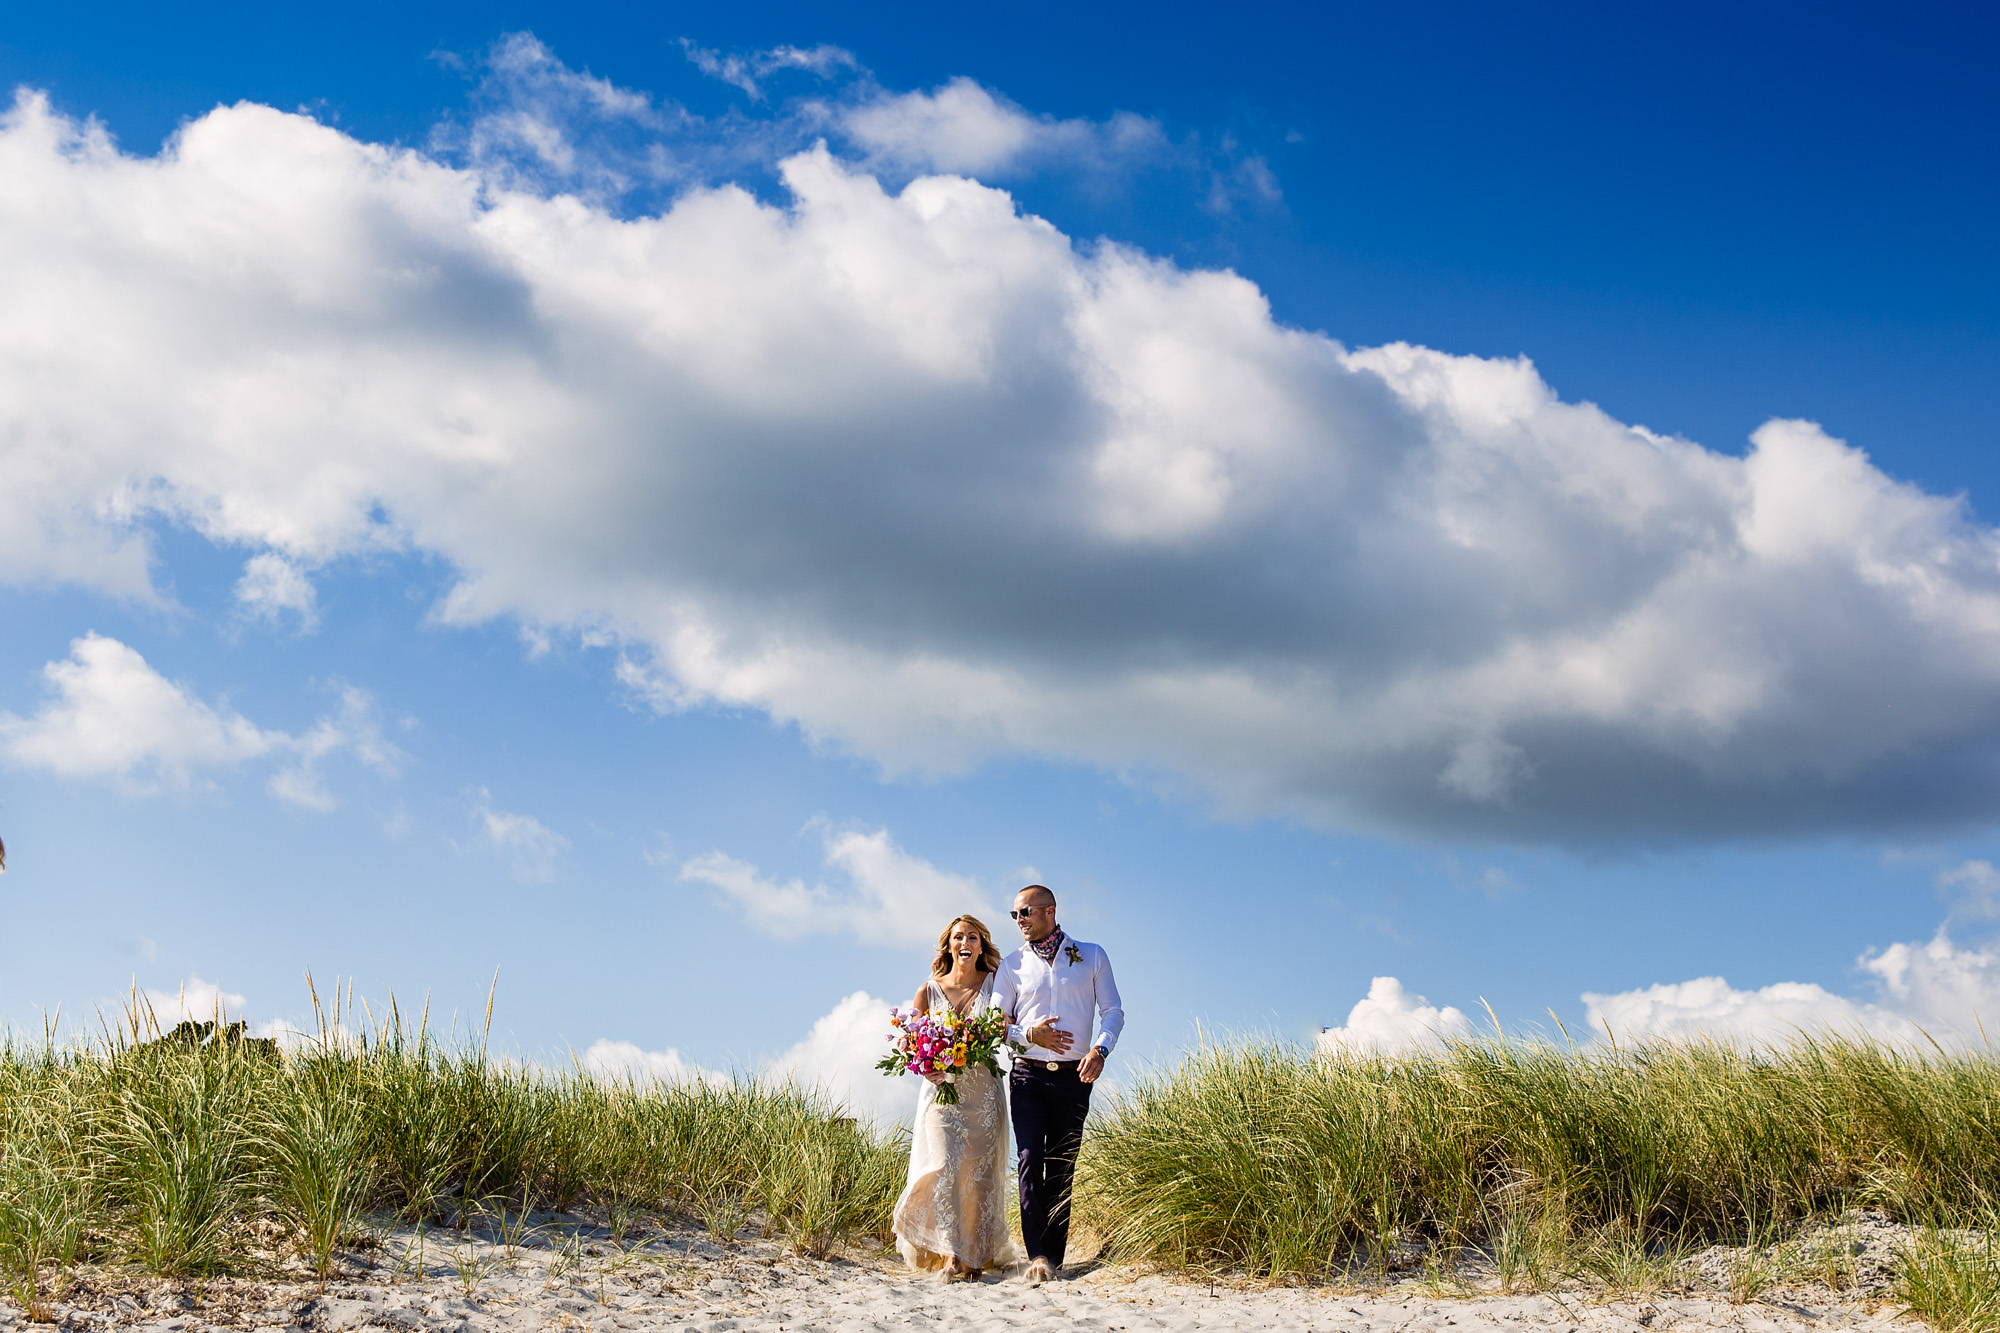 Candid ceremony photos from a Pine Point Beach wedding in Maine